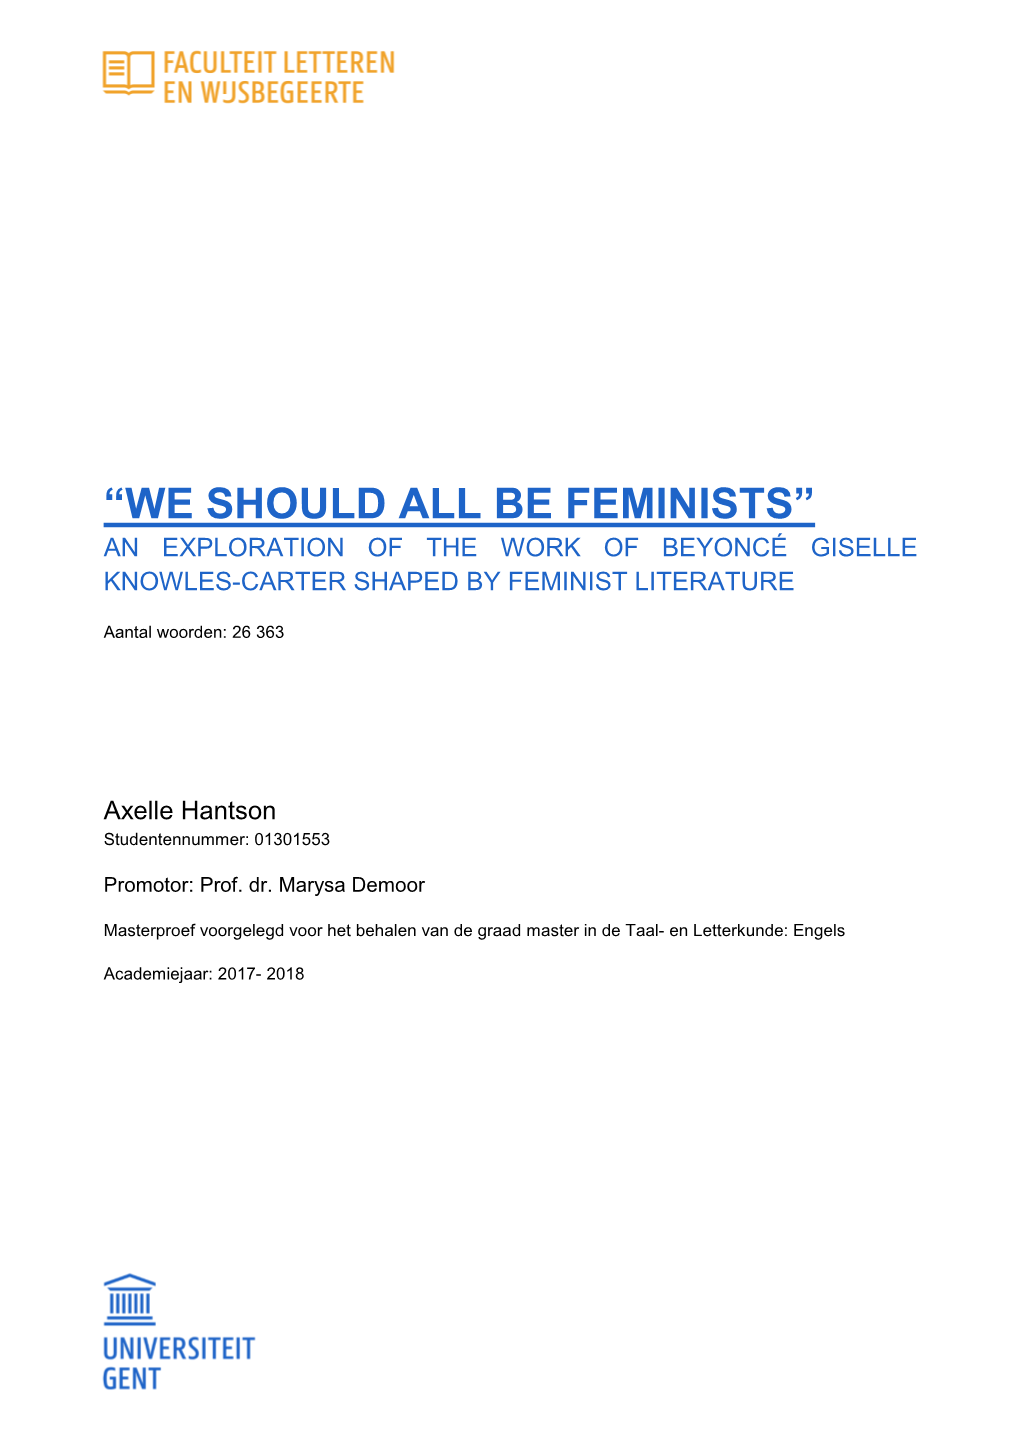 “We Should All Be Feminists” an Exploration of the Work of Beyoncé Giselle Knowles-Carter Shaped by Feminist Literature